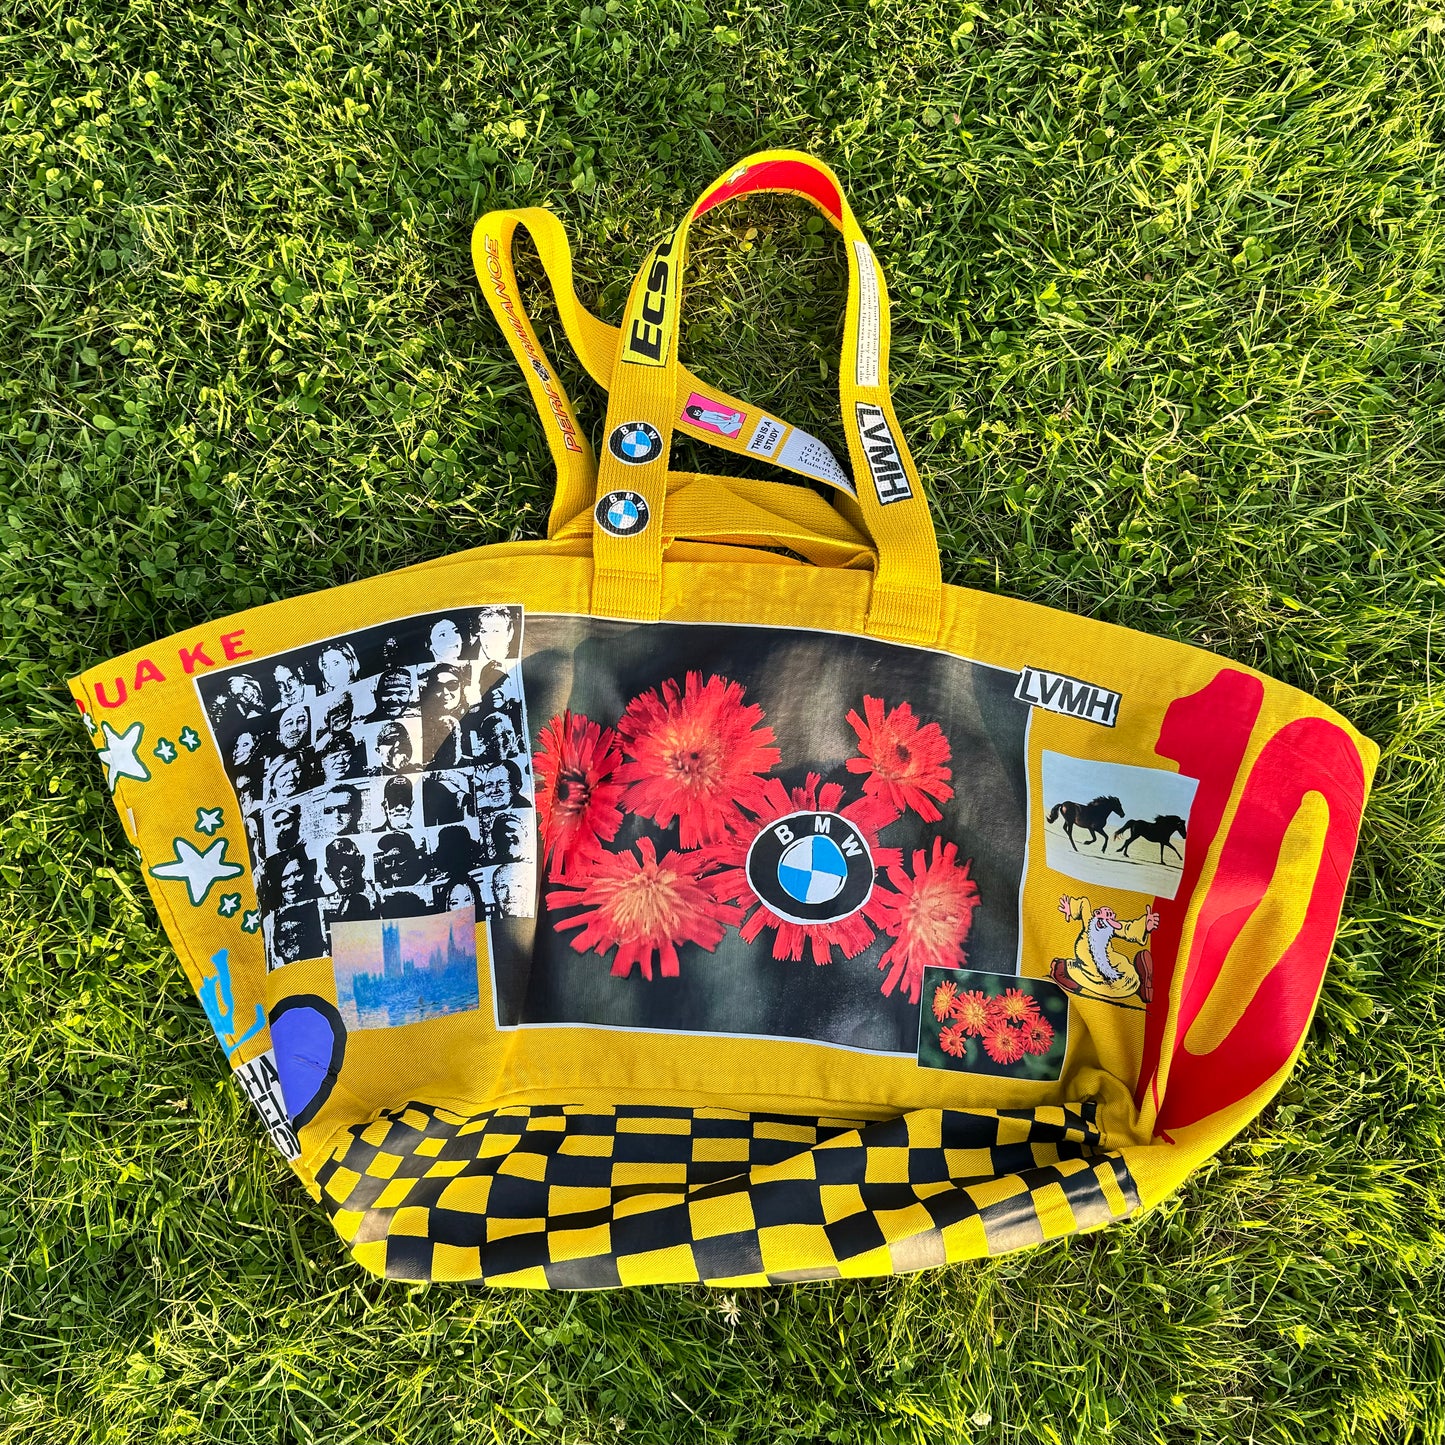 GIANT TOTE 1 of 1 - YELLOW No. 2